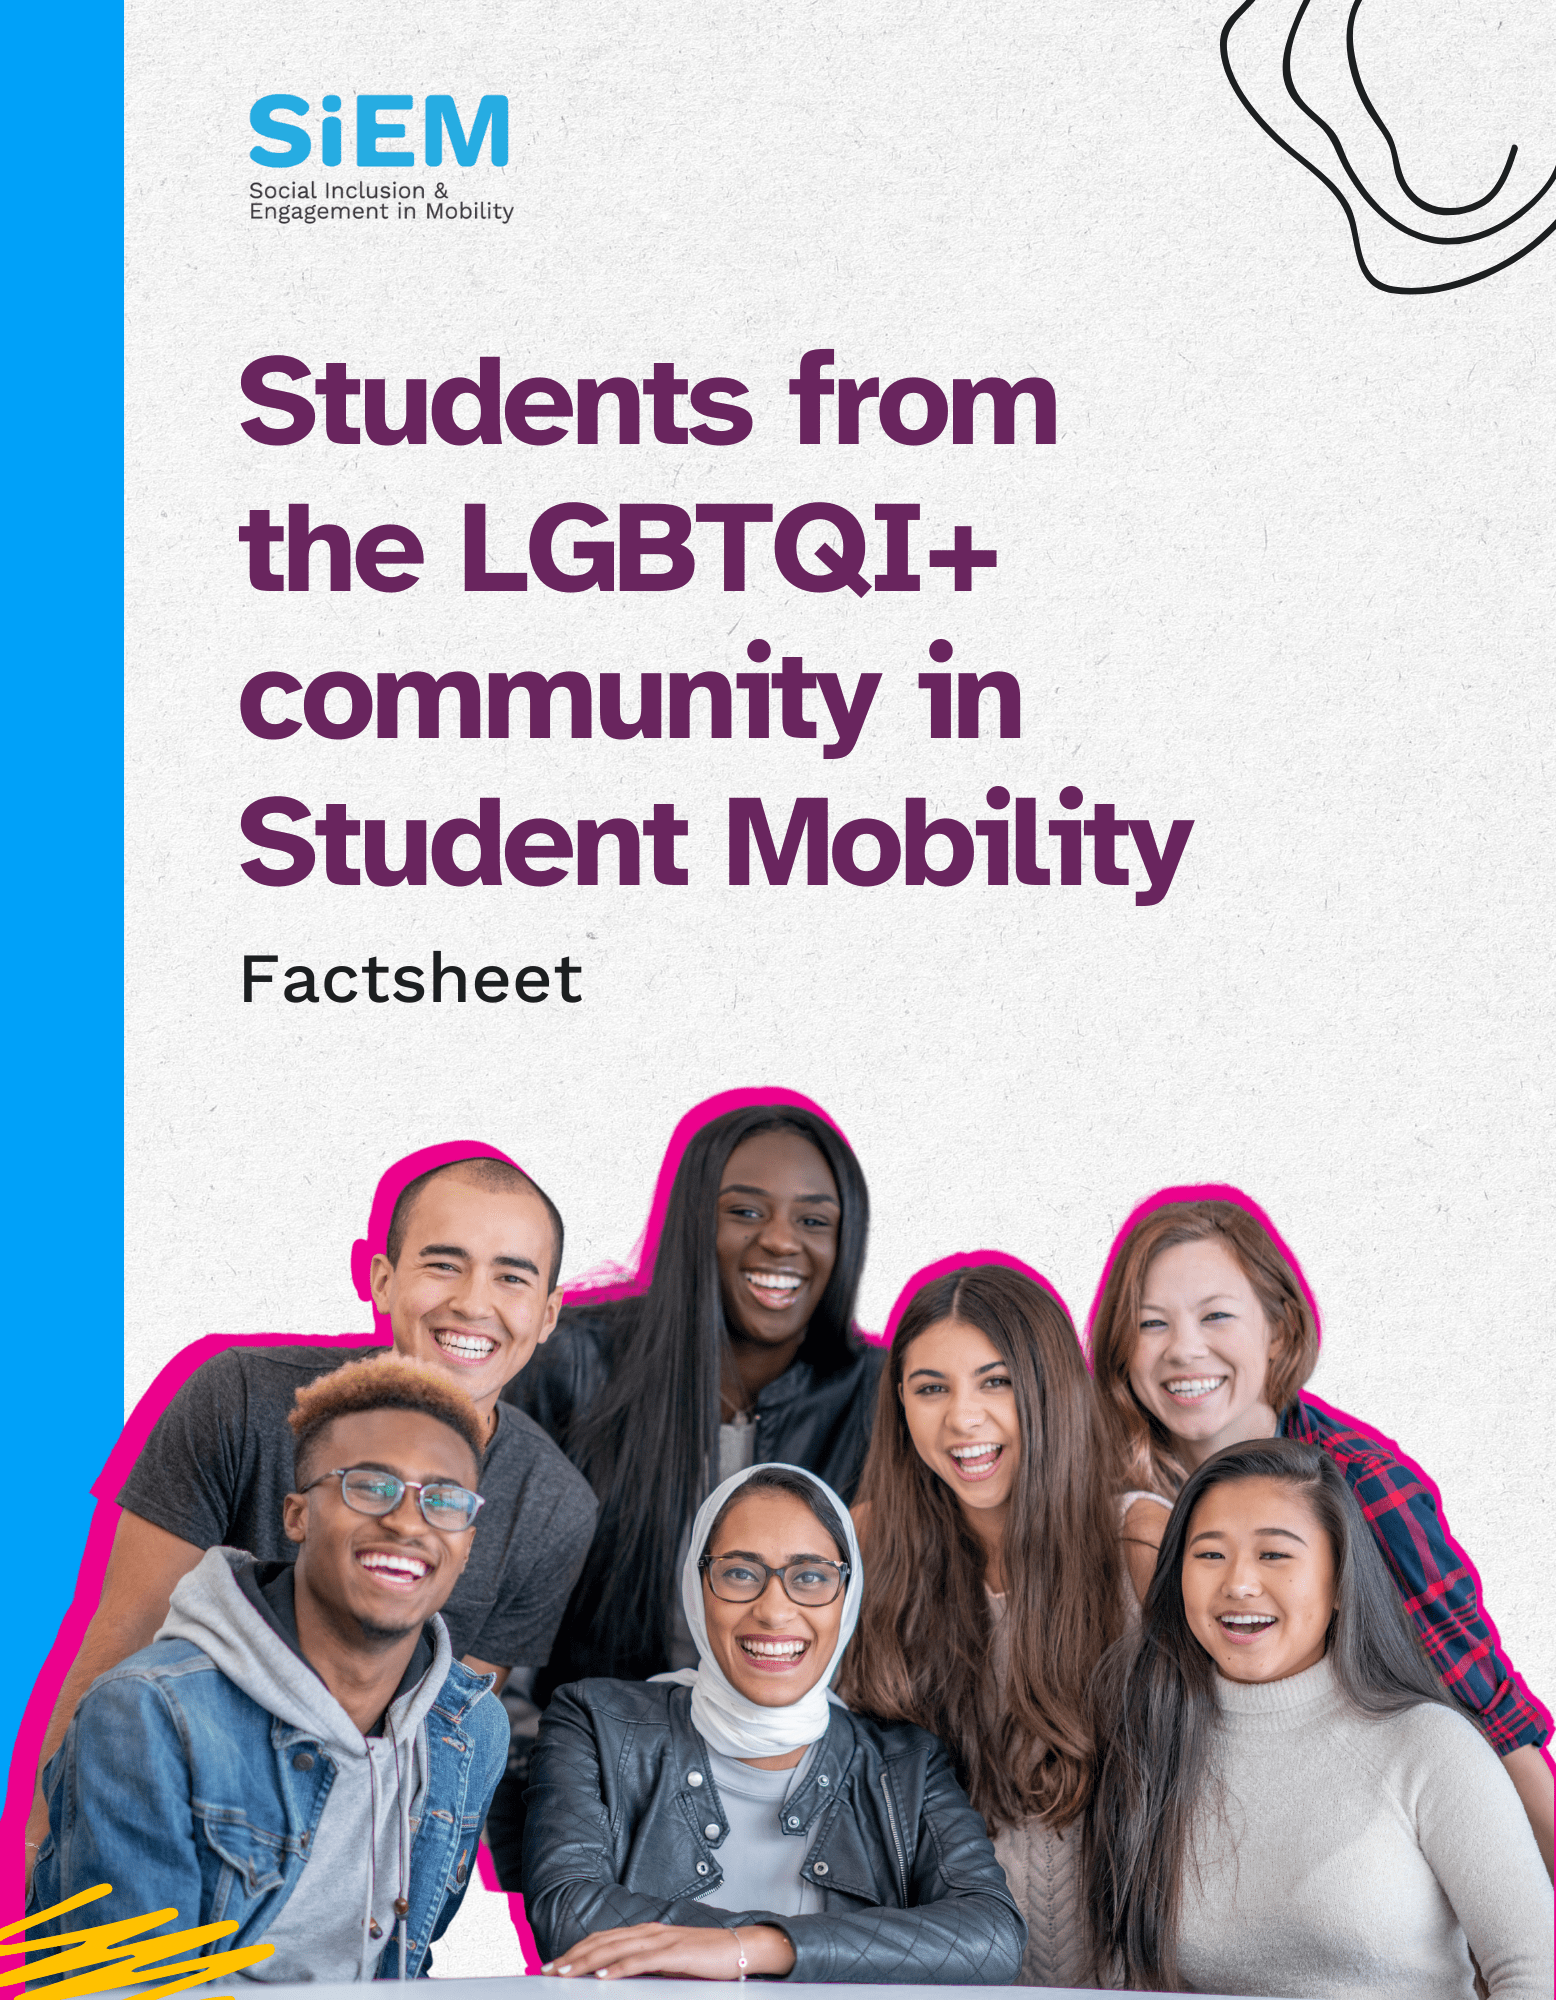 Factsheet - Students from the LGBTQI+ community in Student Mobility